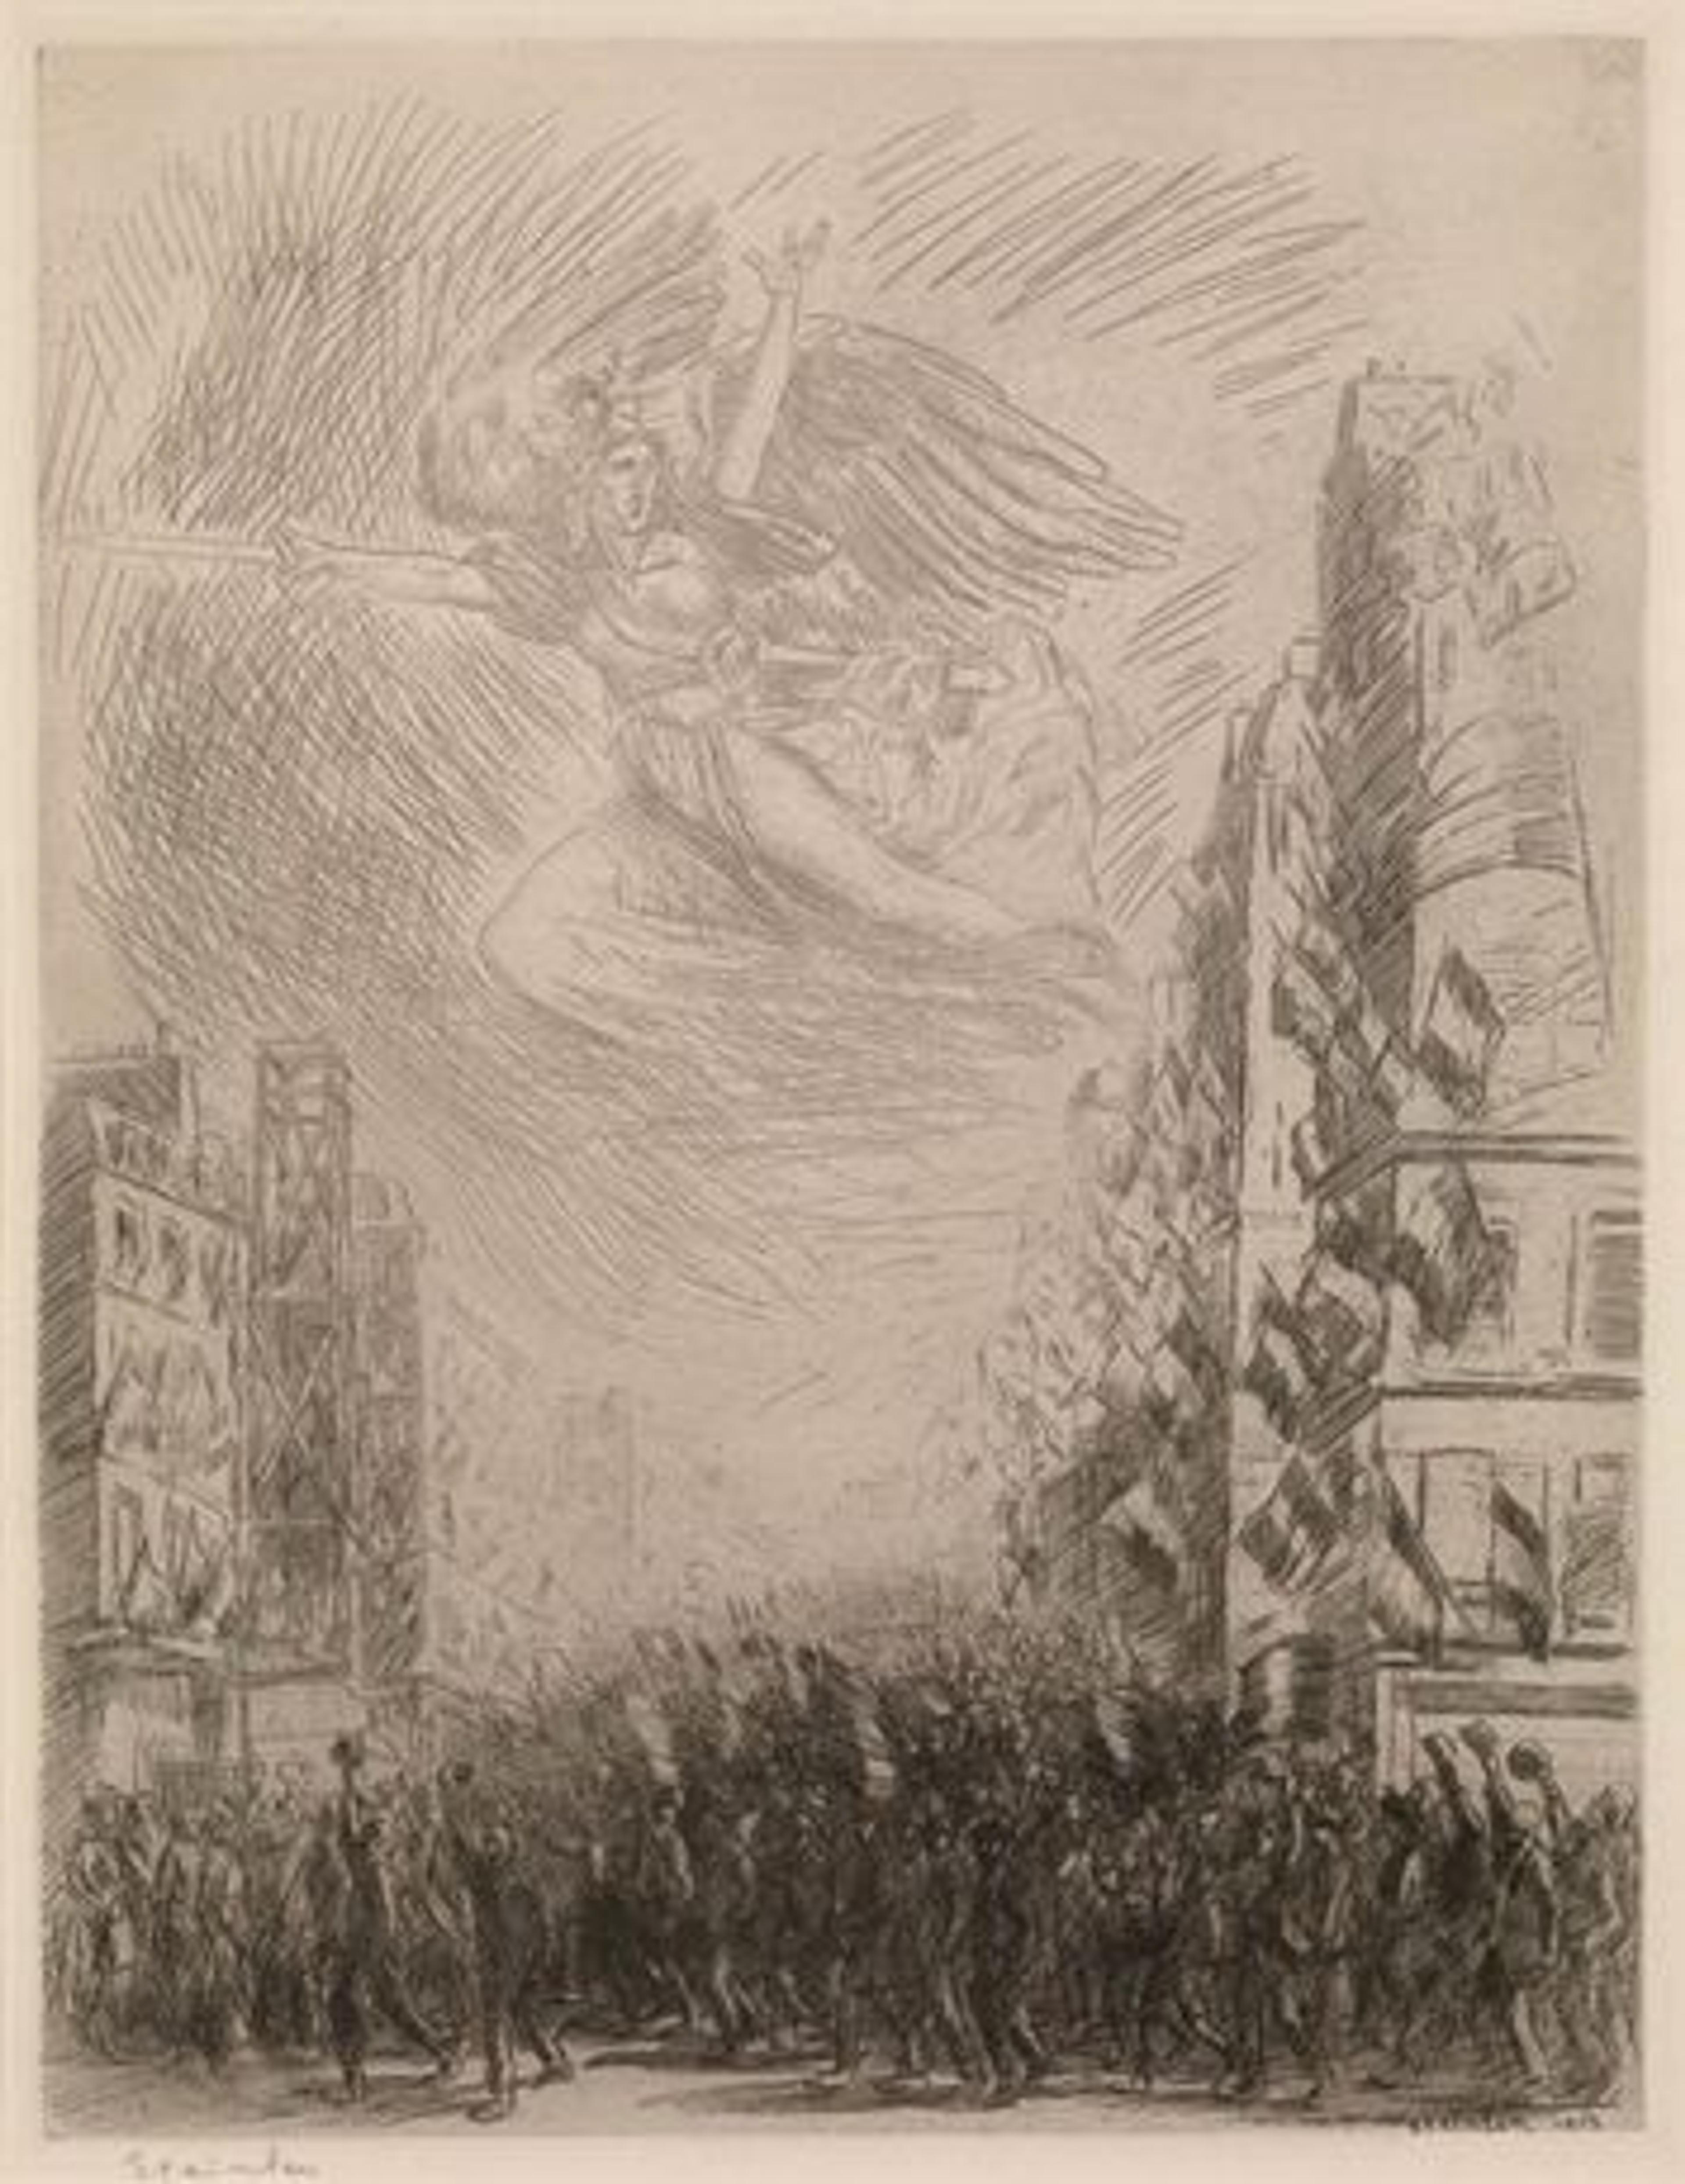 Théophile-Alexandre Steinlen | Mobilization or La Marseillaise, 1915 | Etching depicting a victorious angel floating above a large crowd in a public square